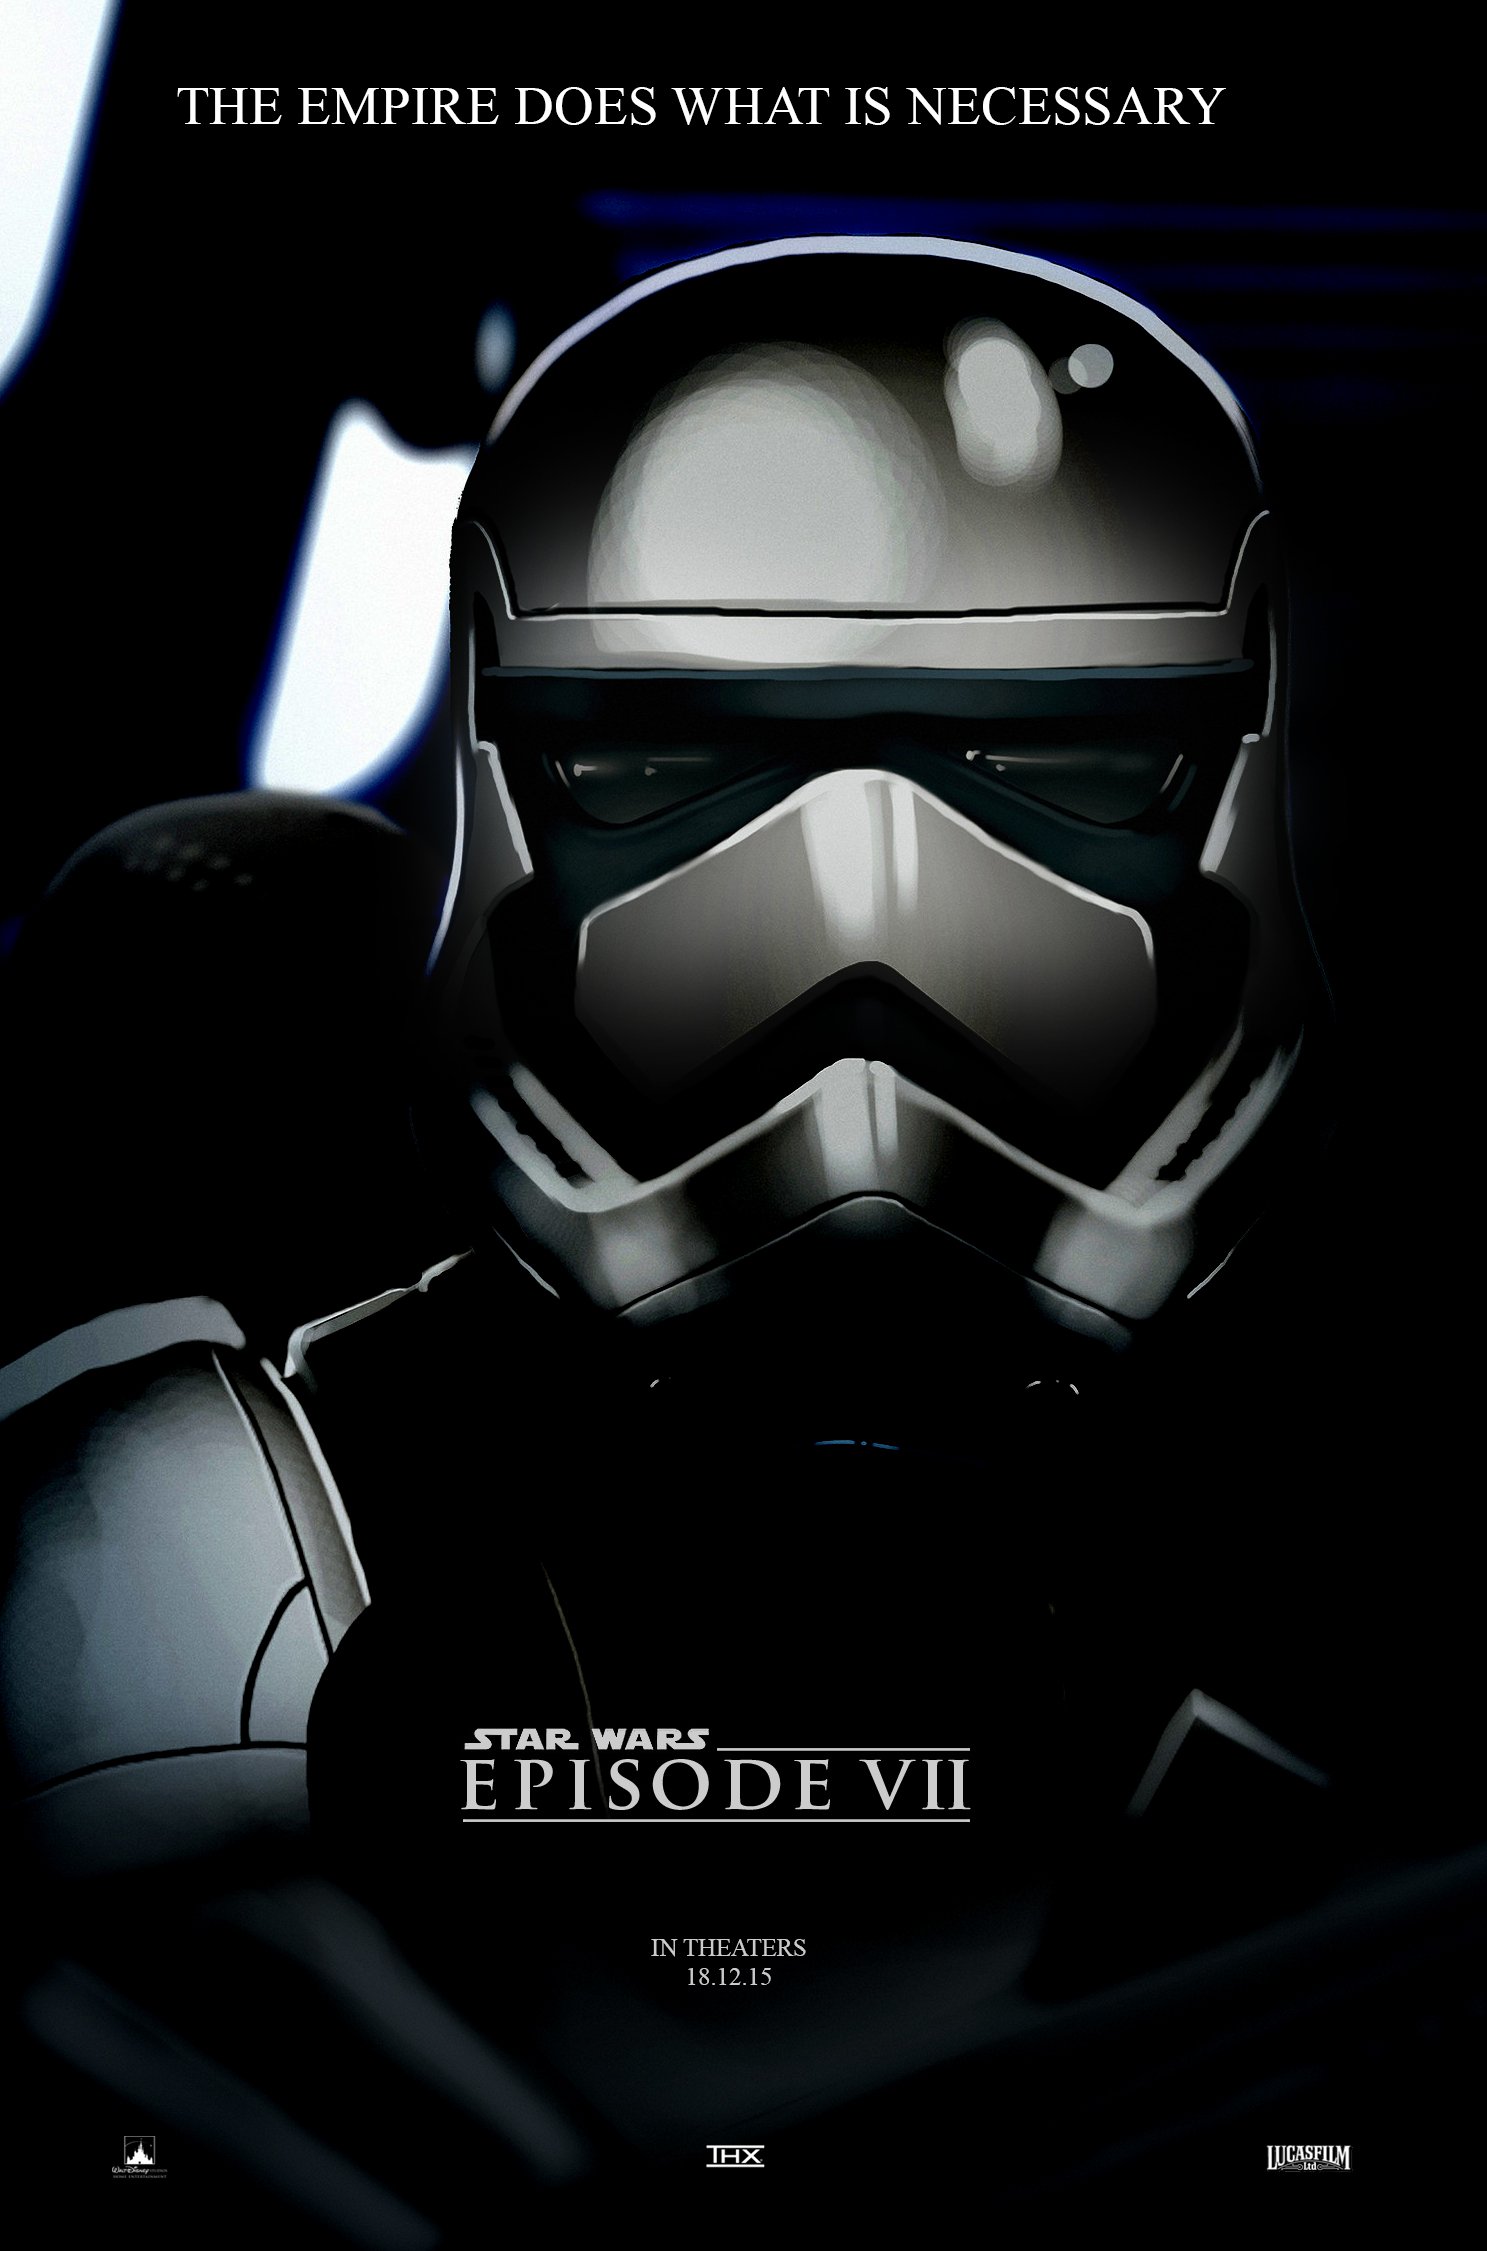 Star Wars Episode 7 Stormtrooper Poster Fan Made by Ivan Cheam